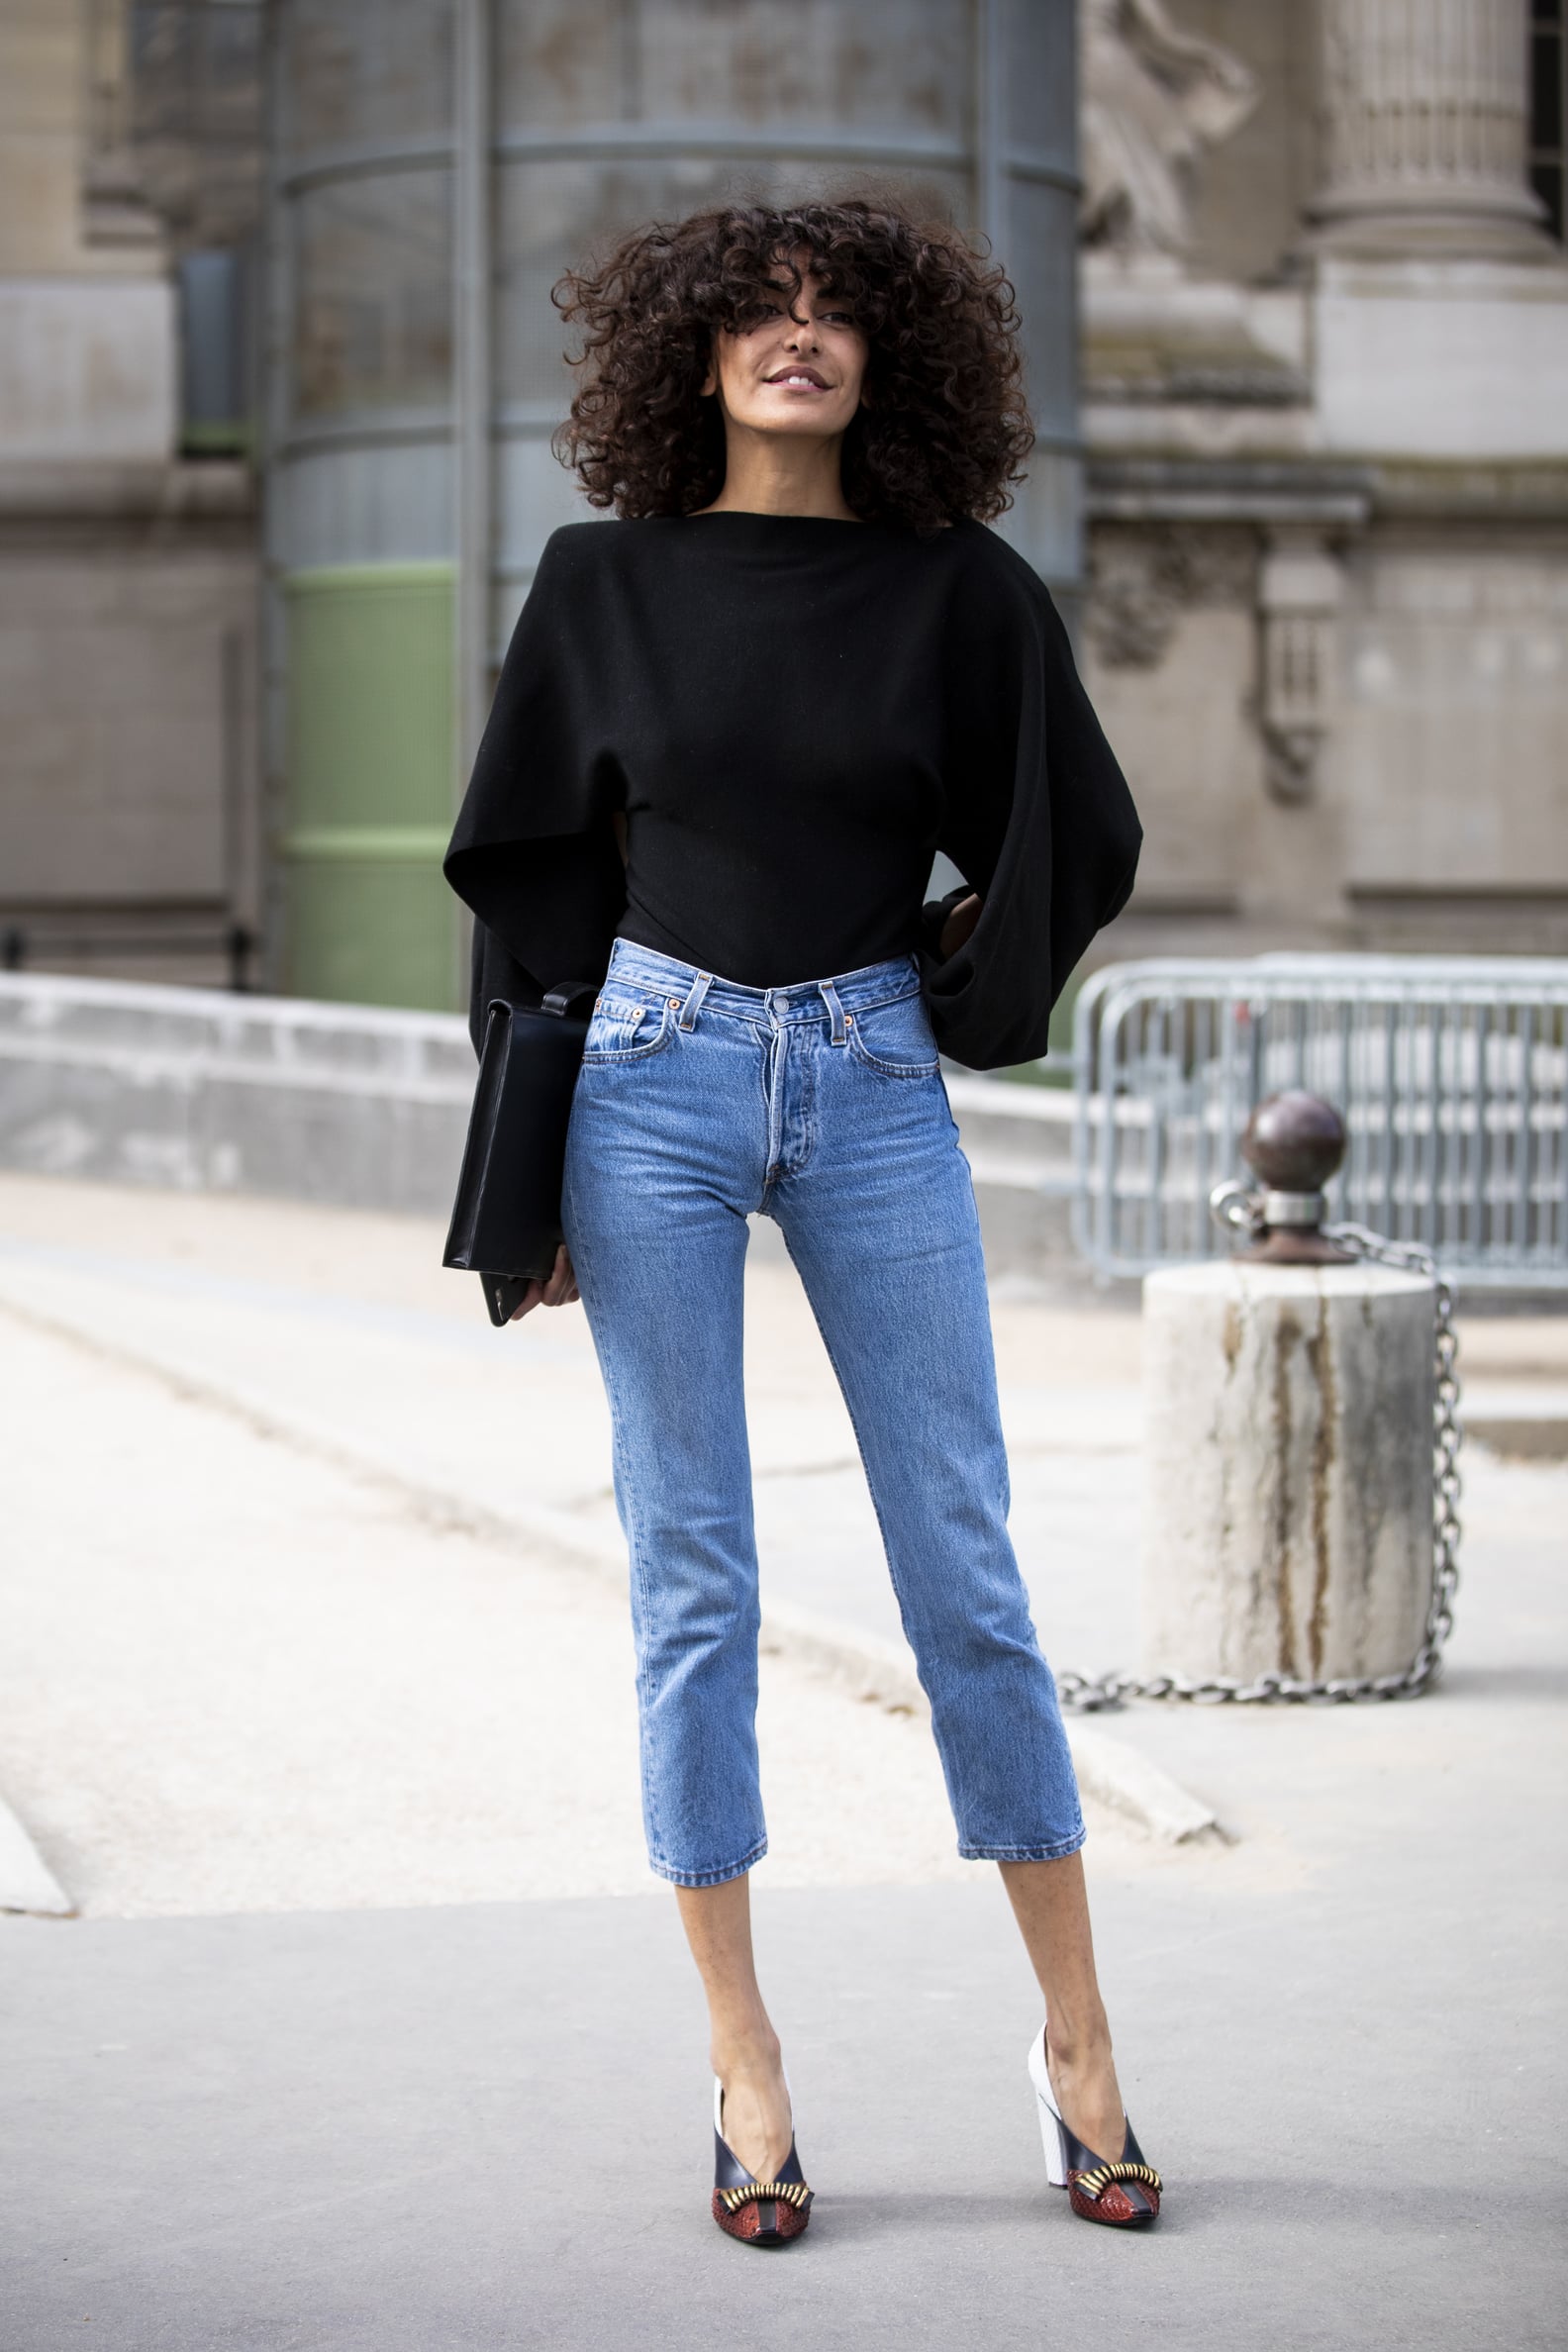 How to Wear Cropped Jeans | POPSUGAR Fashion